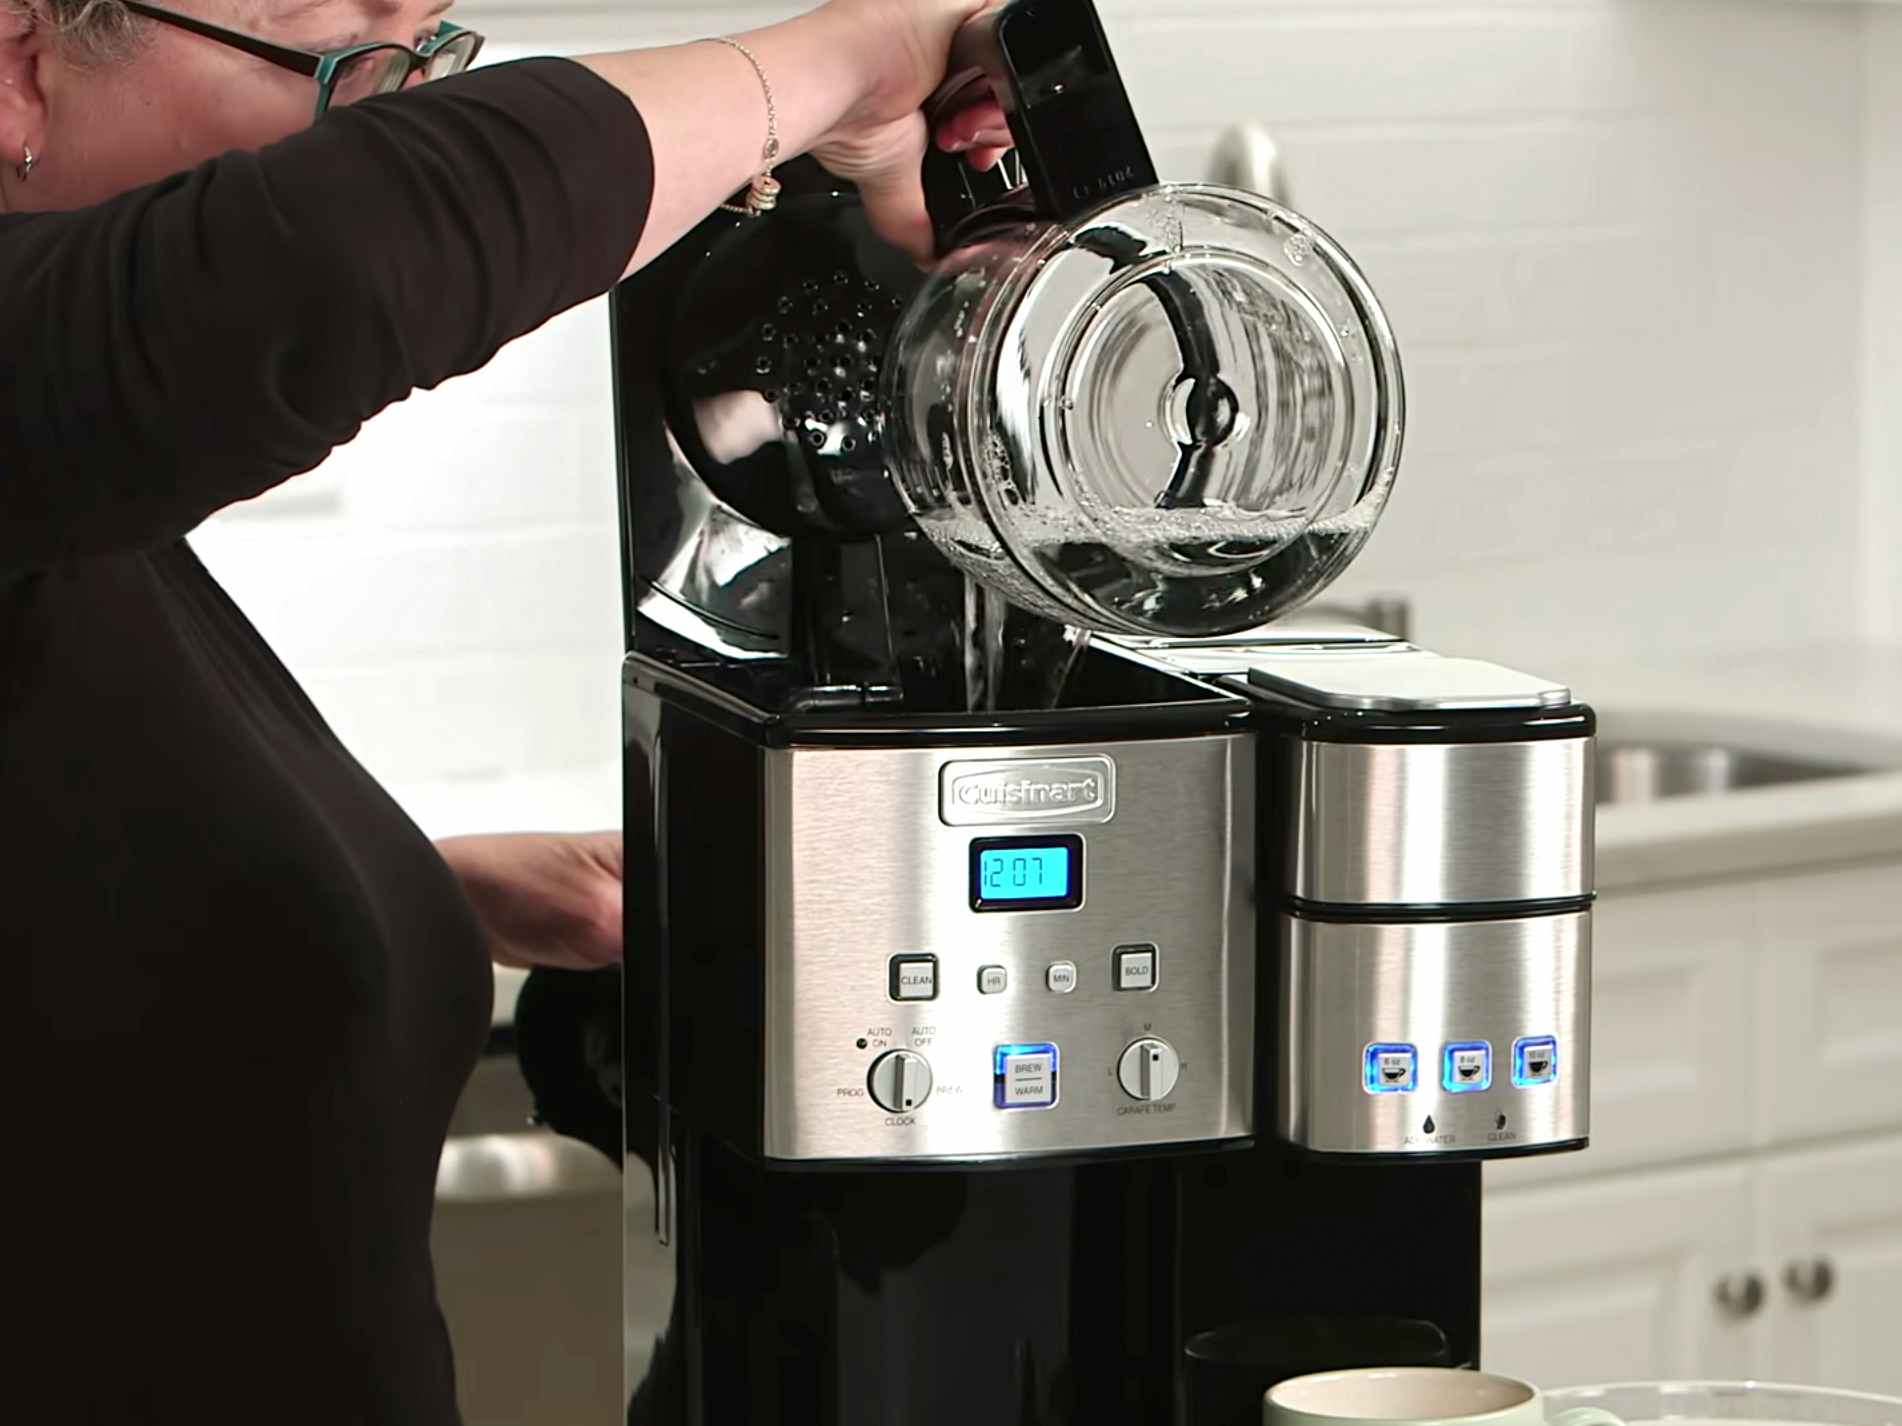 person cleaning a cuisinart coffee maker with water-vinegar solution